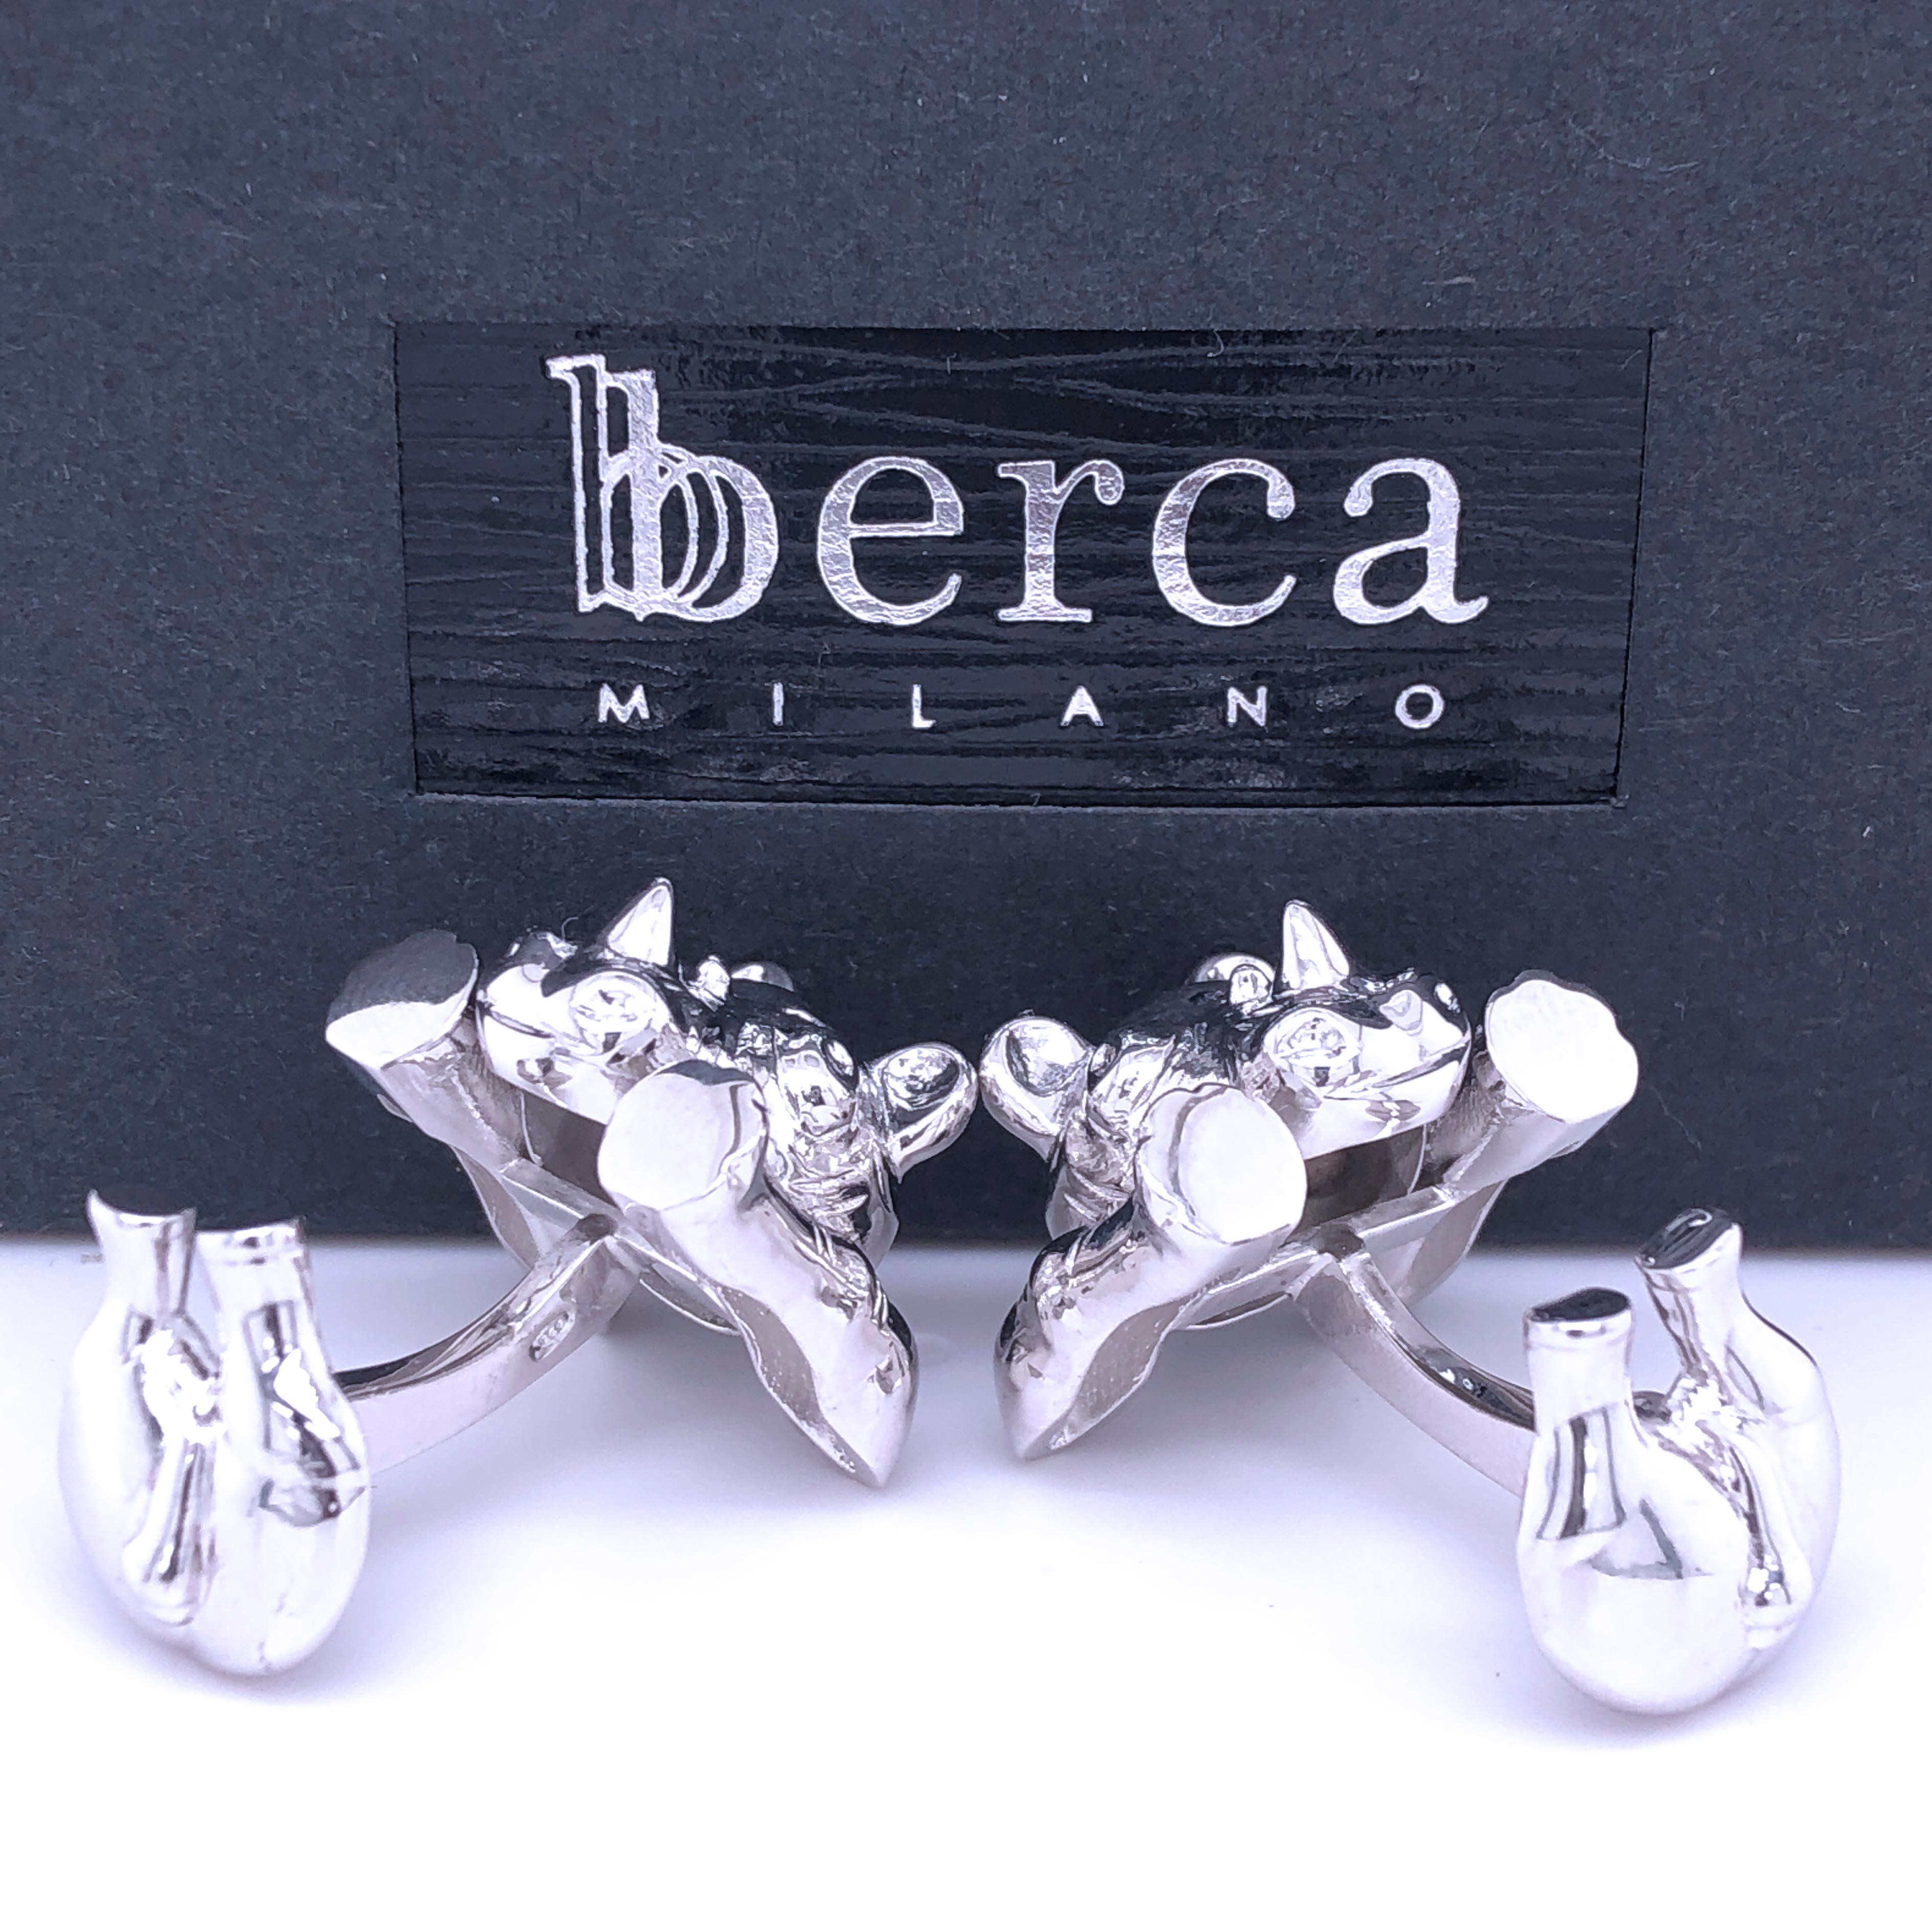 Berca Hand Engraved Rhinoceros Shaped Solid Sterling Silver Cufflinks In New Condition For Sale In Valenza, IT